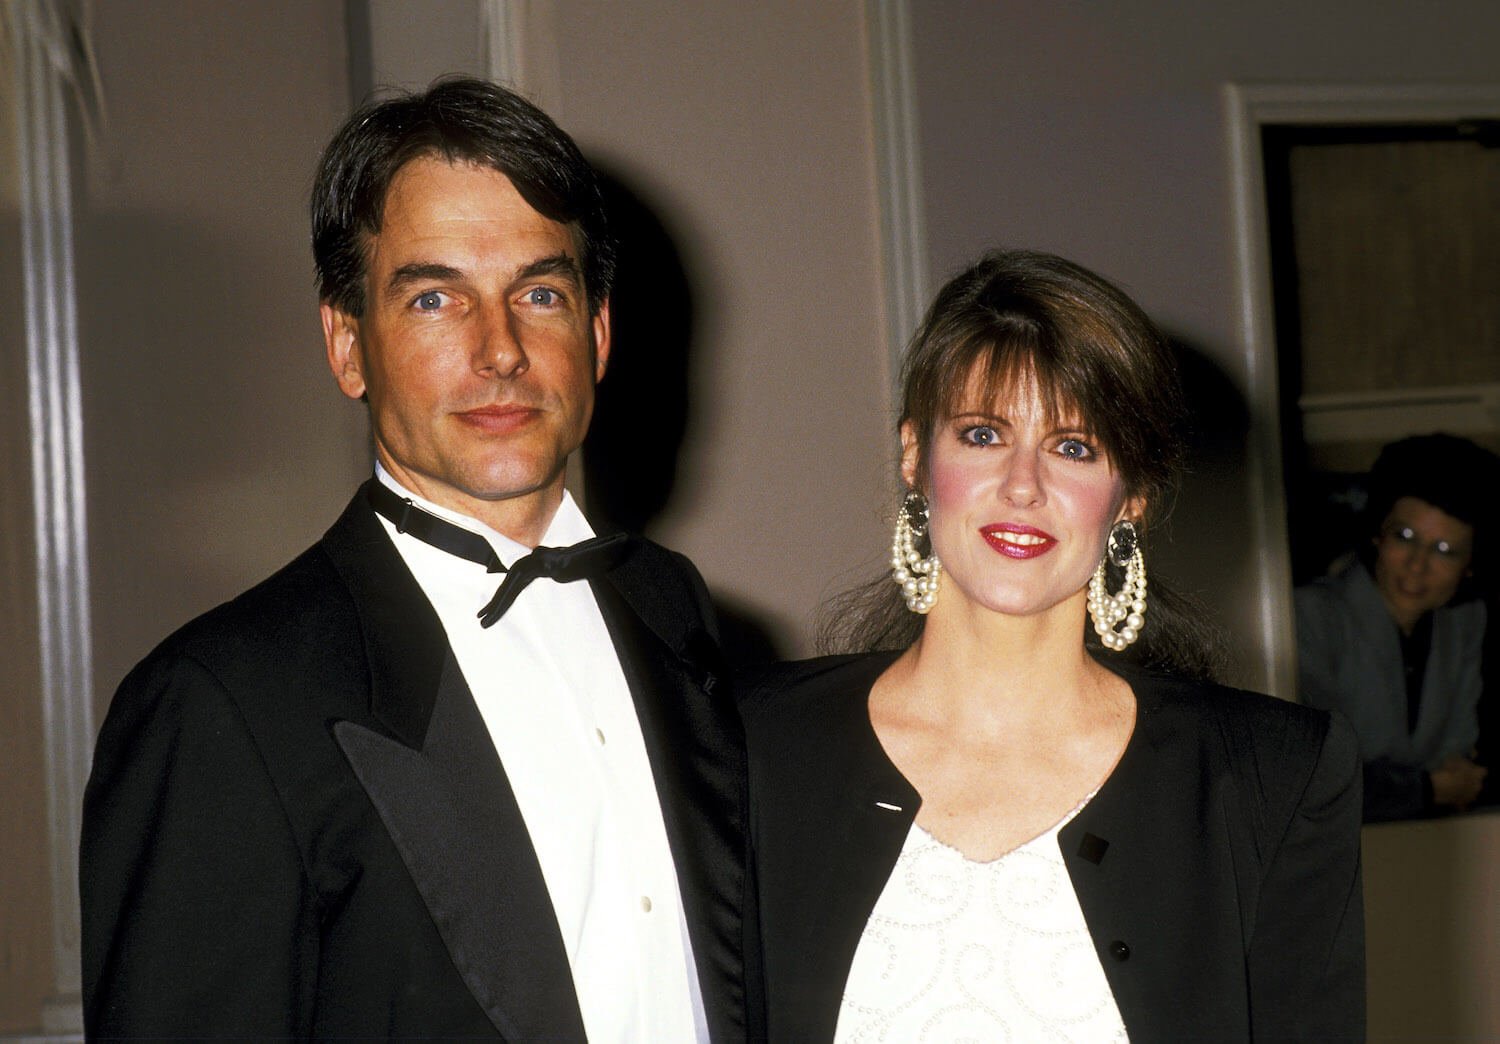 'NCIS' star Mark Harmon and his wife, Pam Dawber, standing next to each other in formal attire